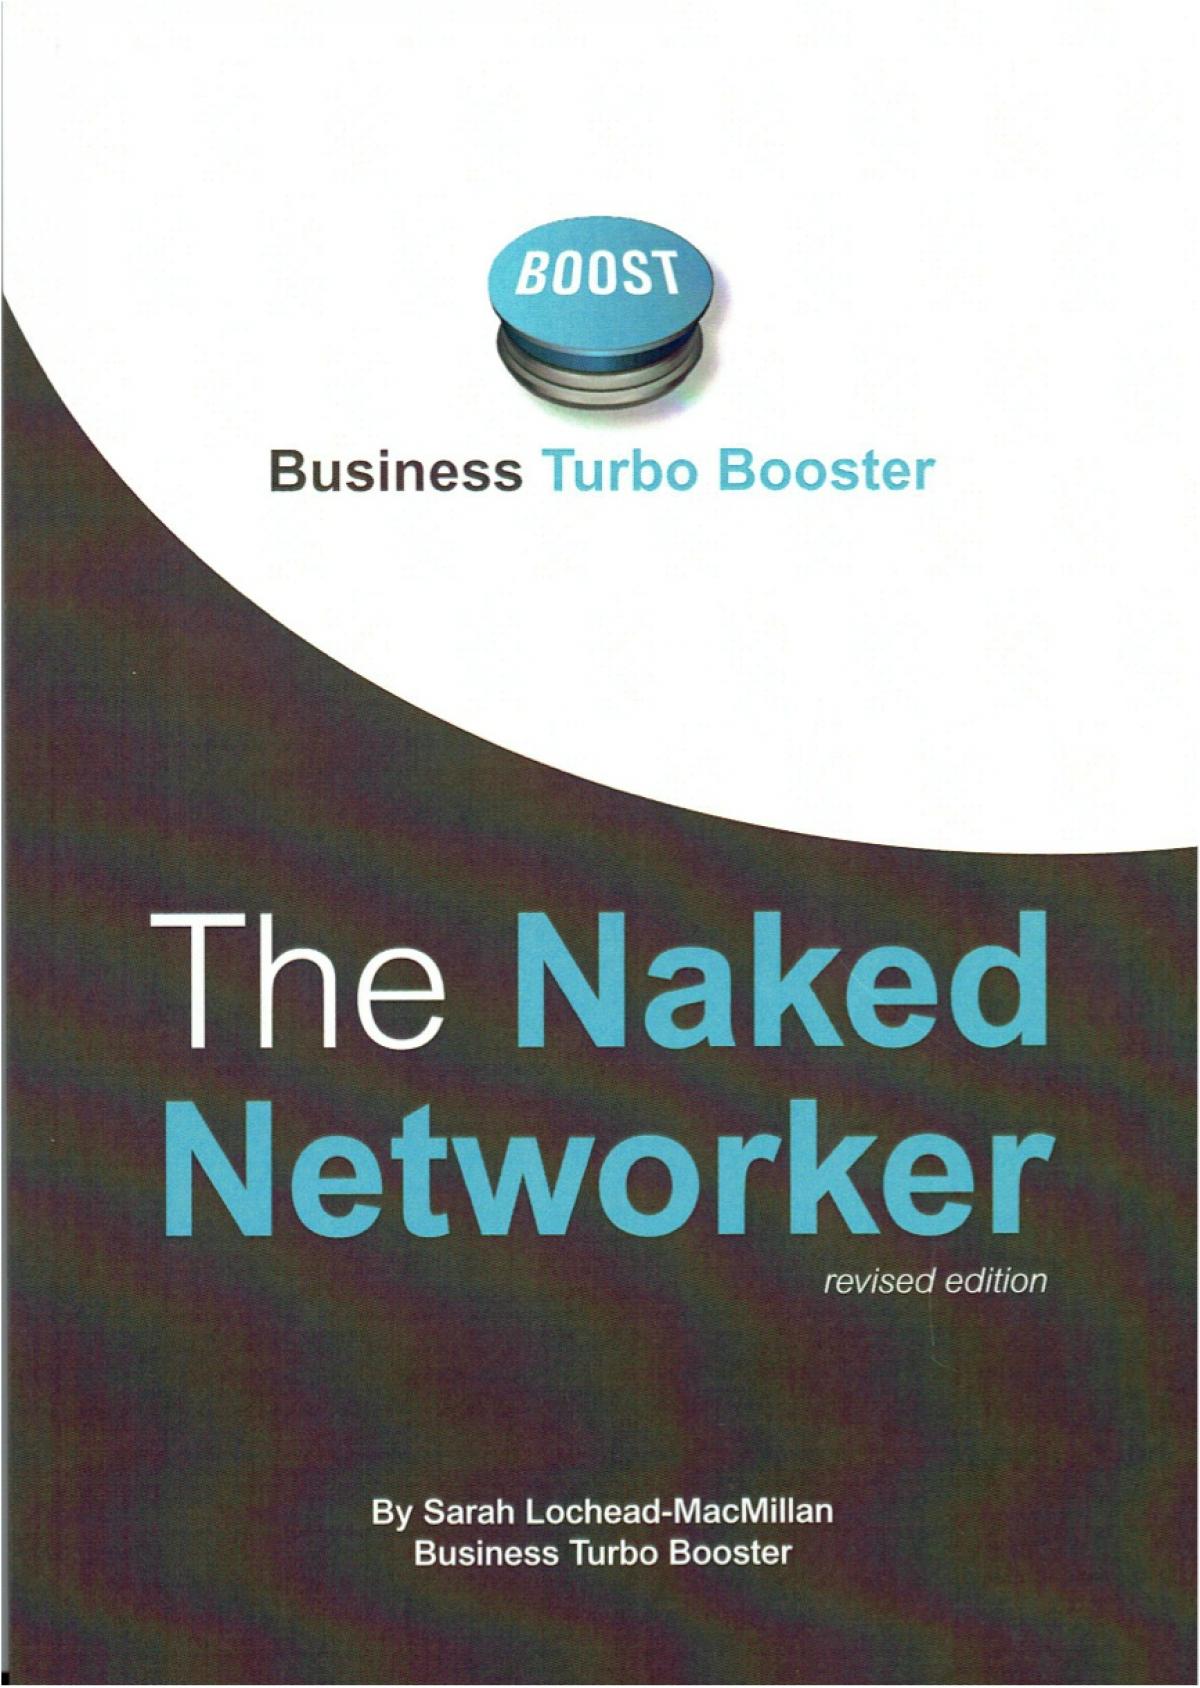 The Naked Networker Grow Your Business New Zealand Business Mentoring Business Turbo Booster